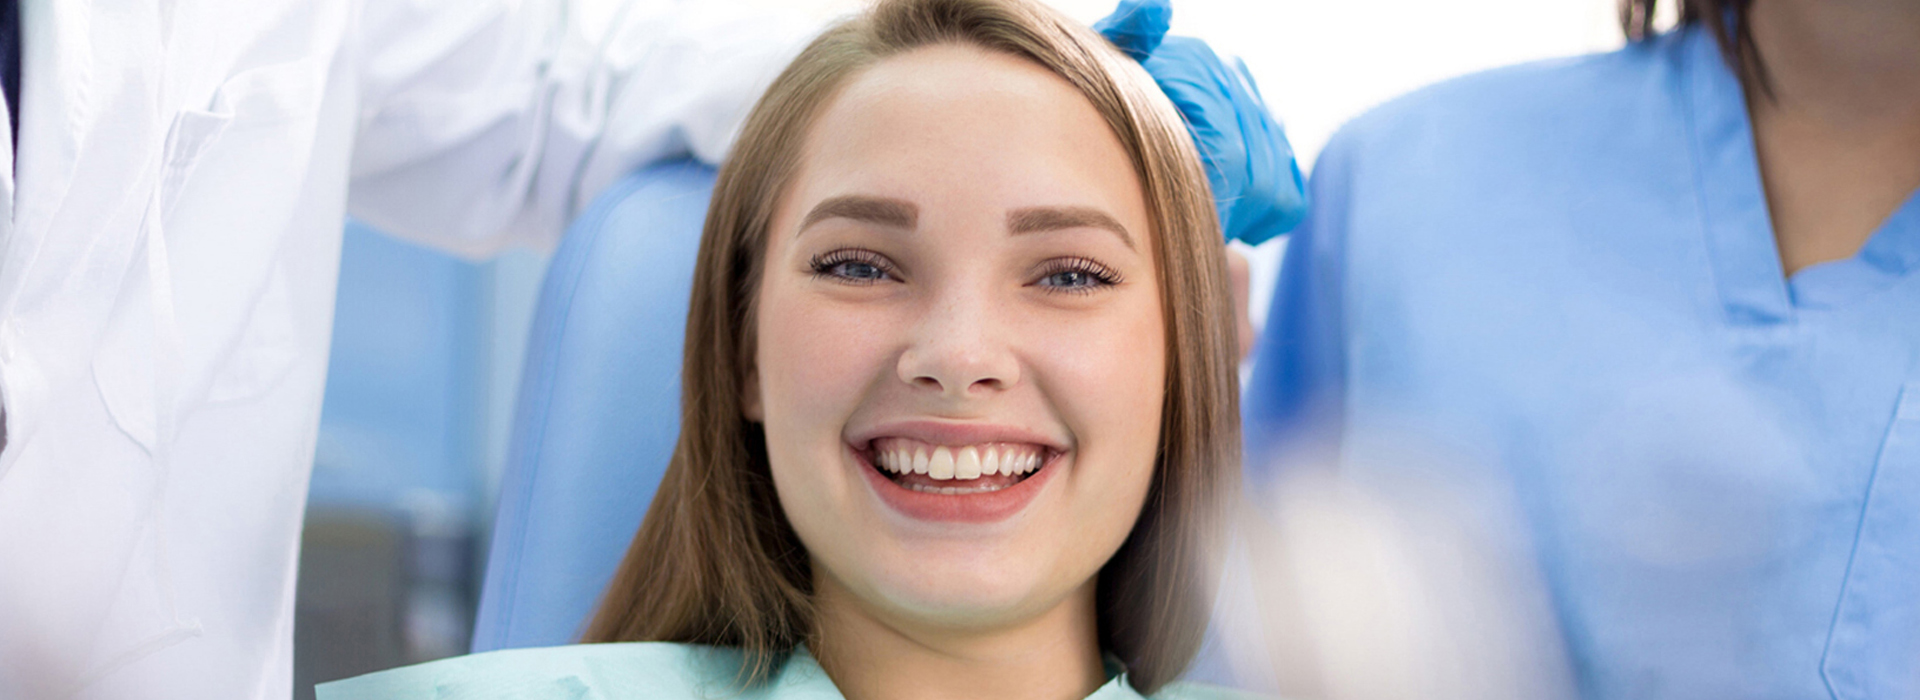 Root Canals in Braes Timbers Houston, TX